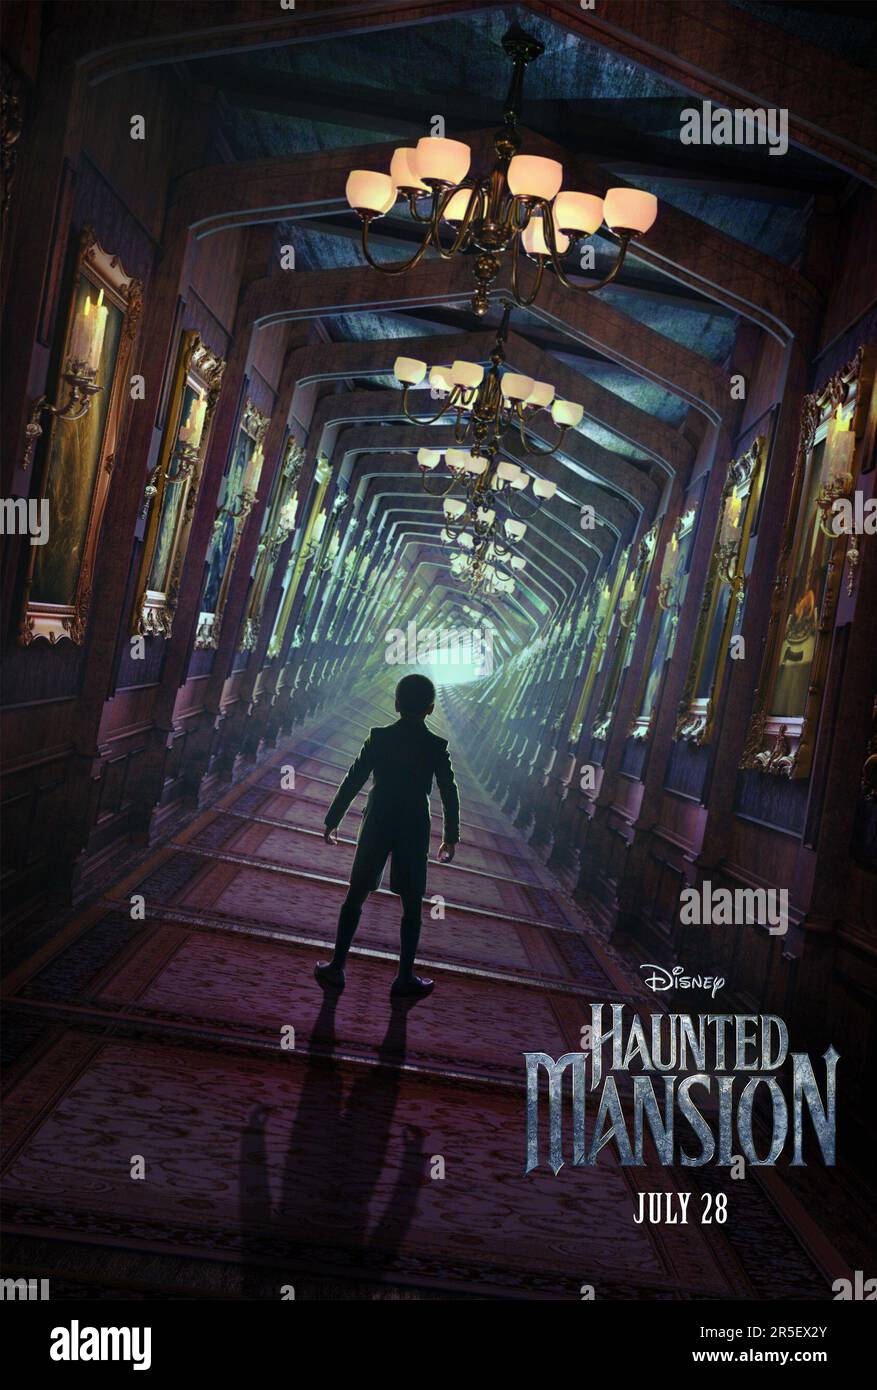 Haunted Mansion movie poster Stock Photo